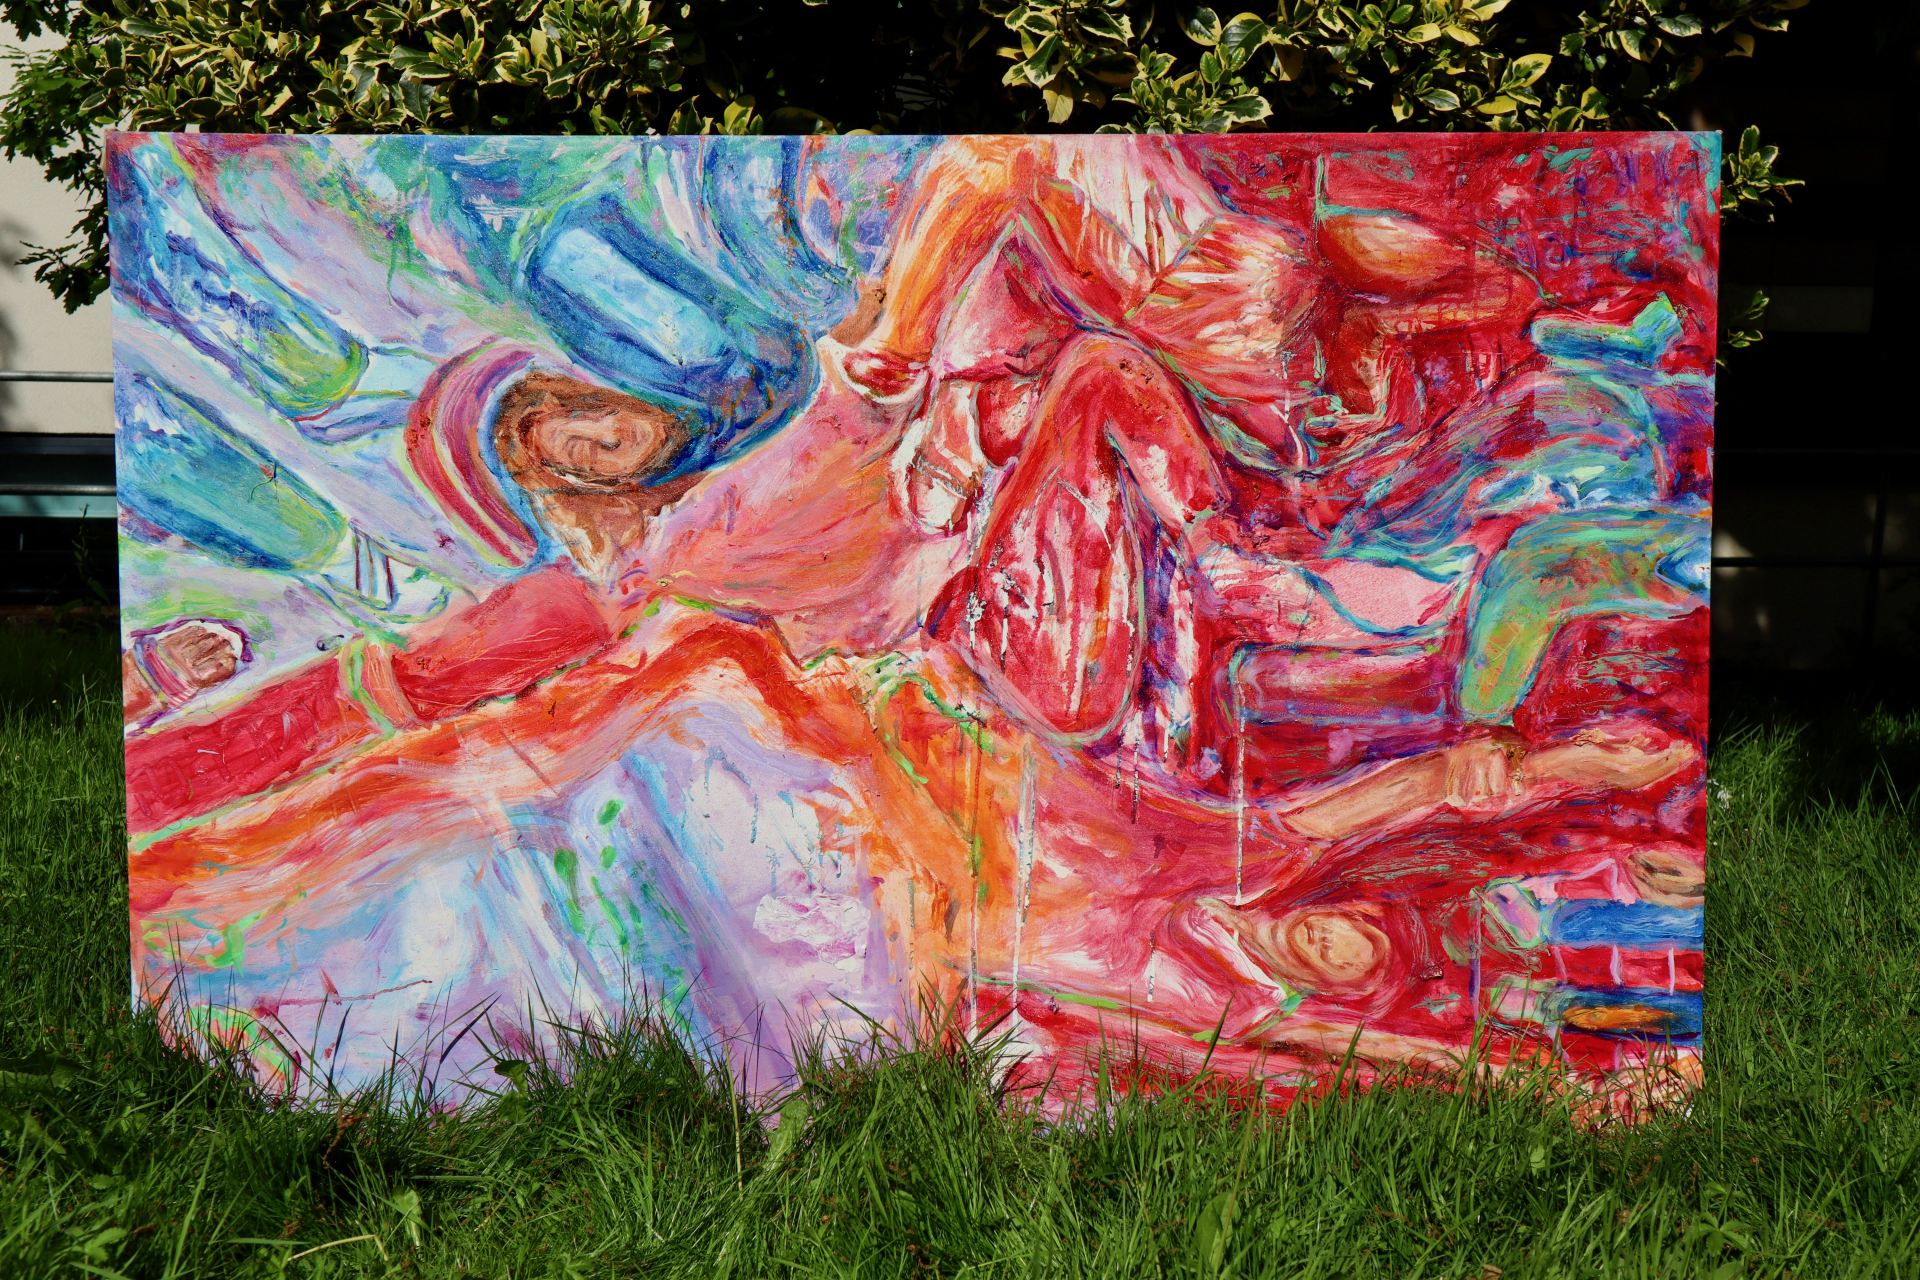 an abstract oil painting of a reclining figure, in red, green, pink and blue.